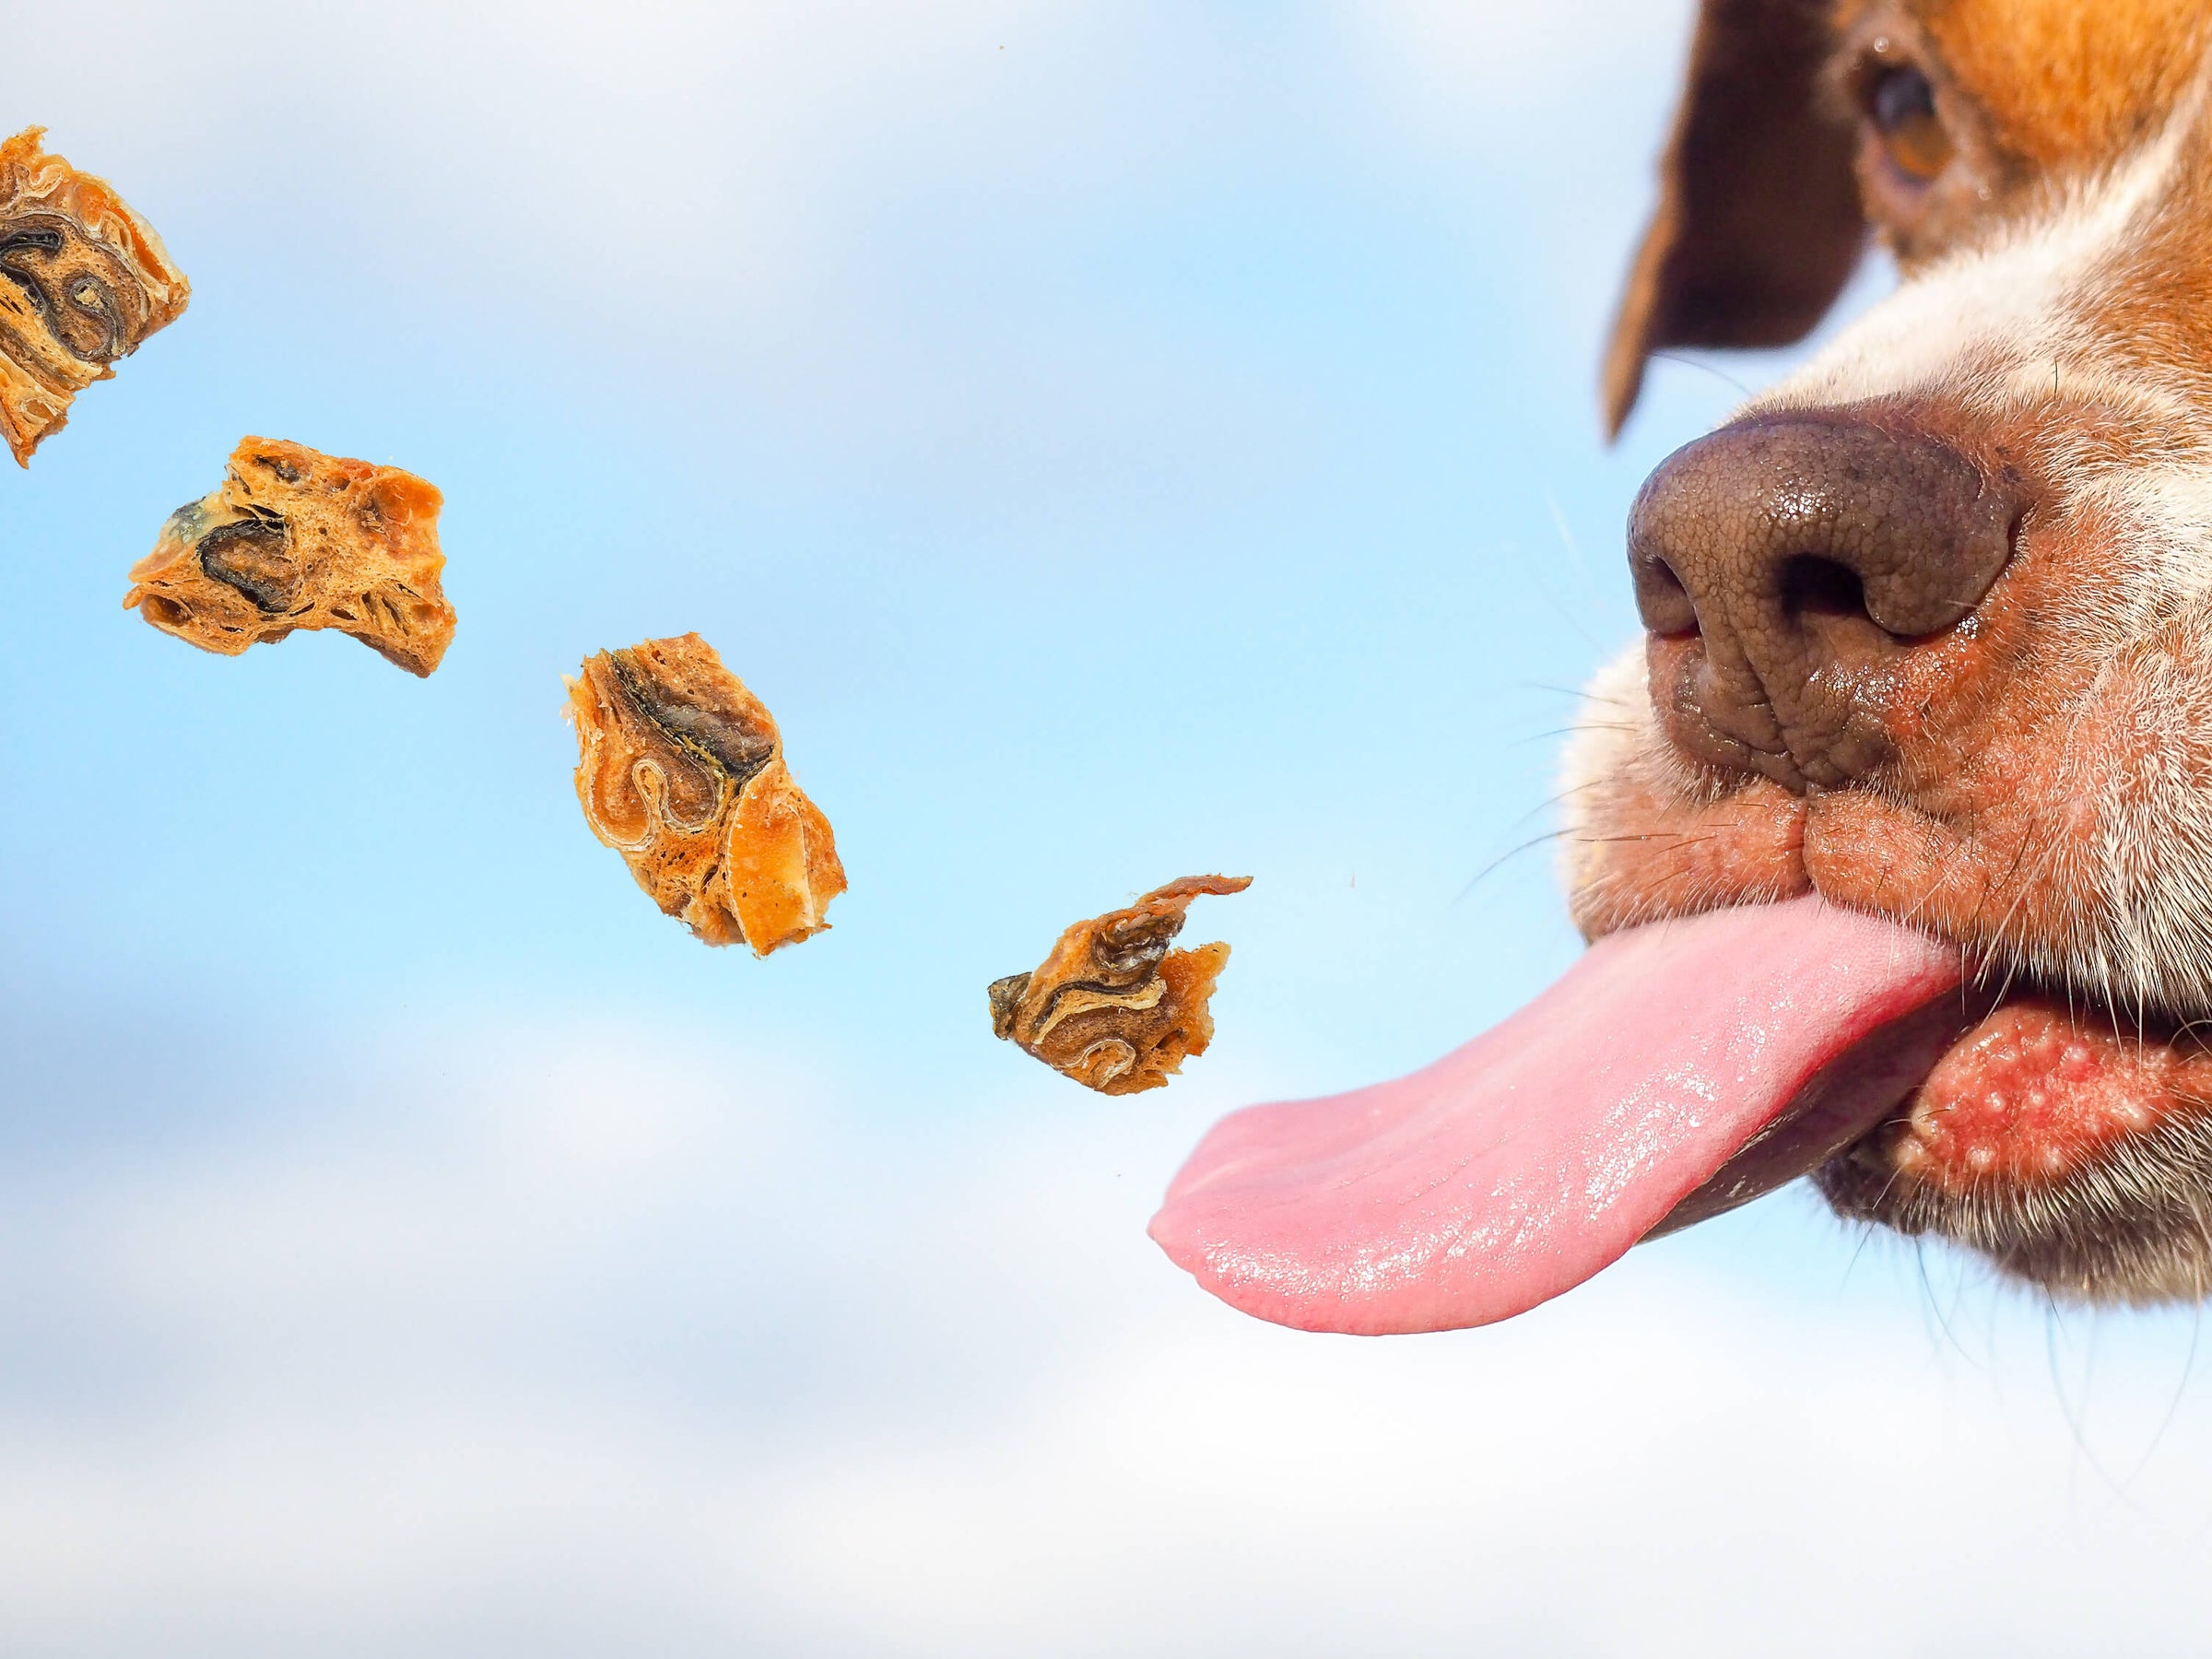 Brown and white dog with long pink tongue sticking out trying to catch dog treats against a blurred sky background